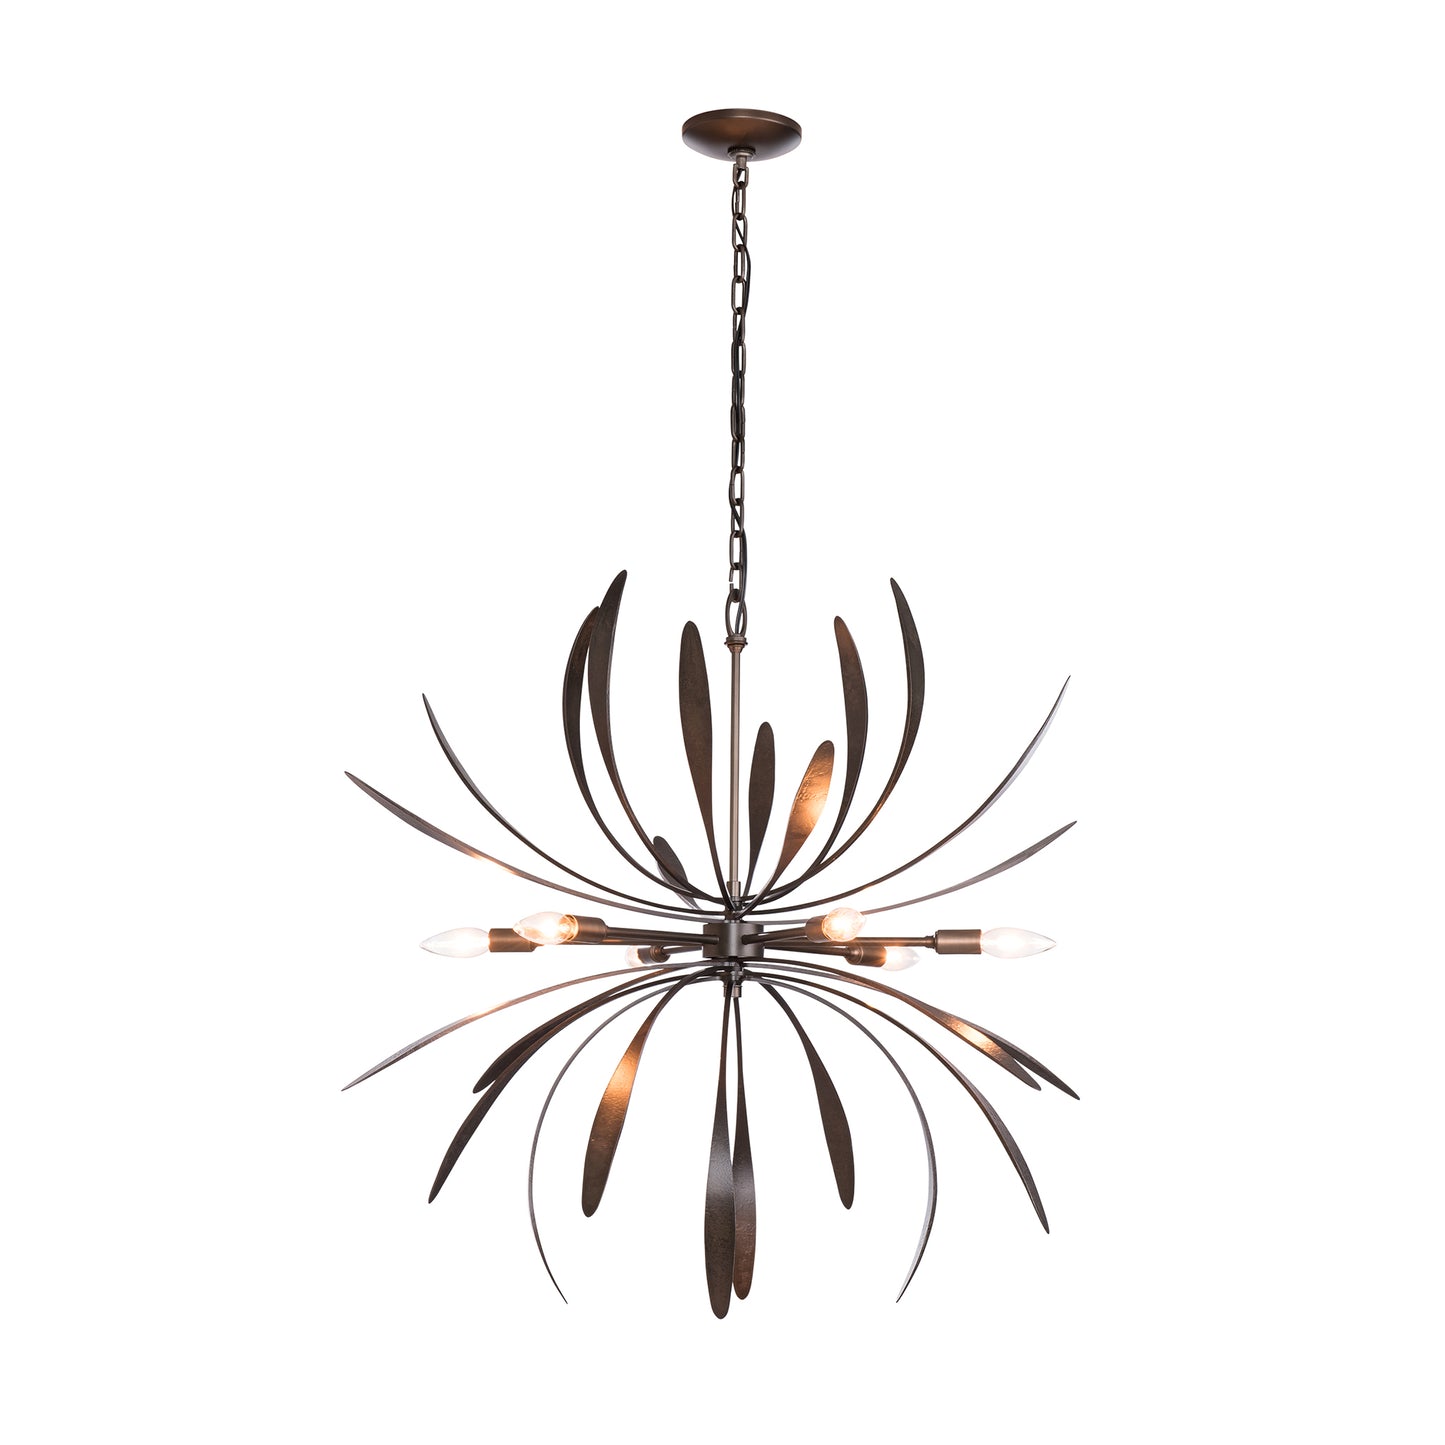 The Hubbardton Forge Dahlia Chandelier is a masterpiece of handcrafted lighting, featuring a large metal leaf gracefully hanging from it.